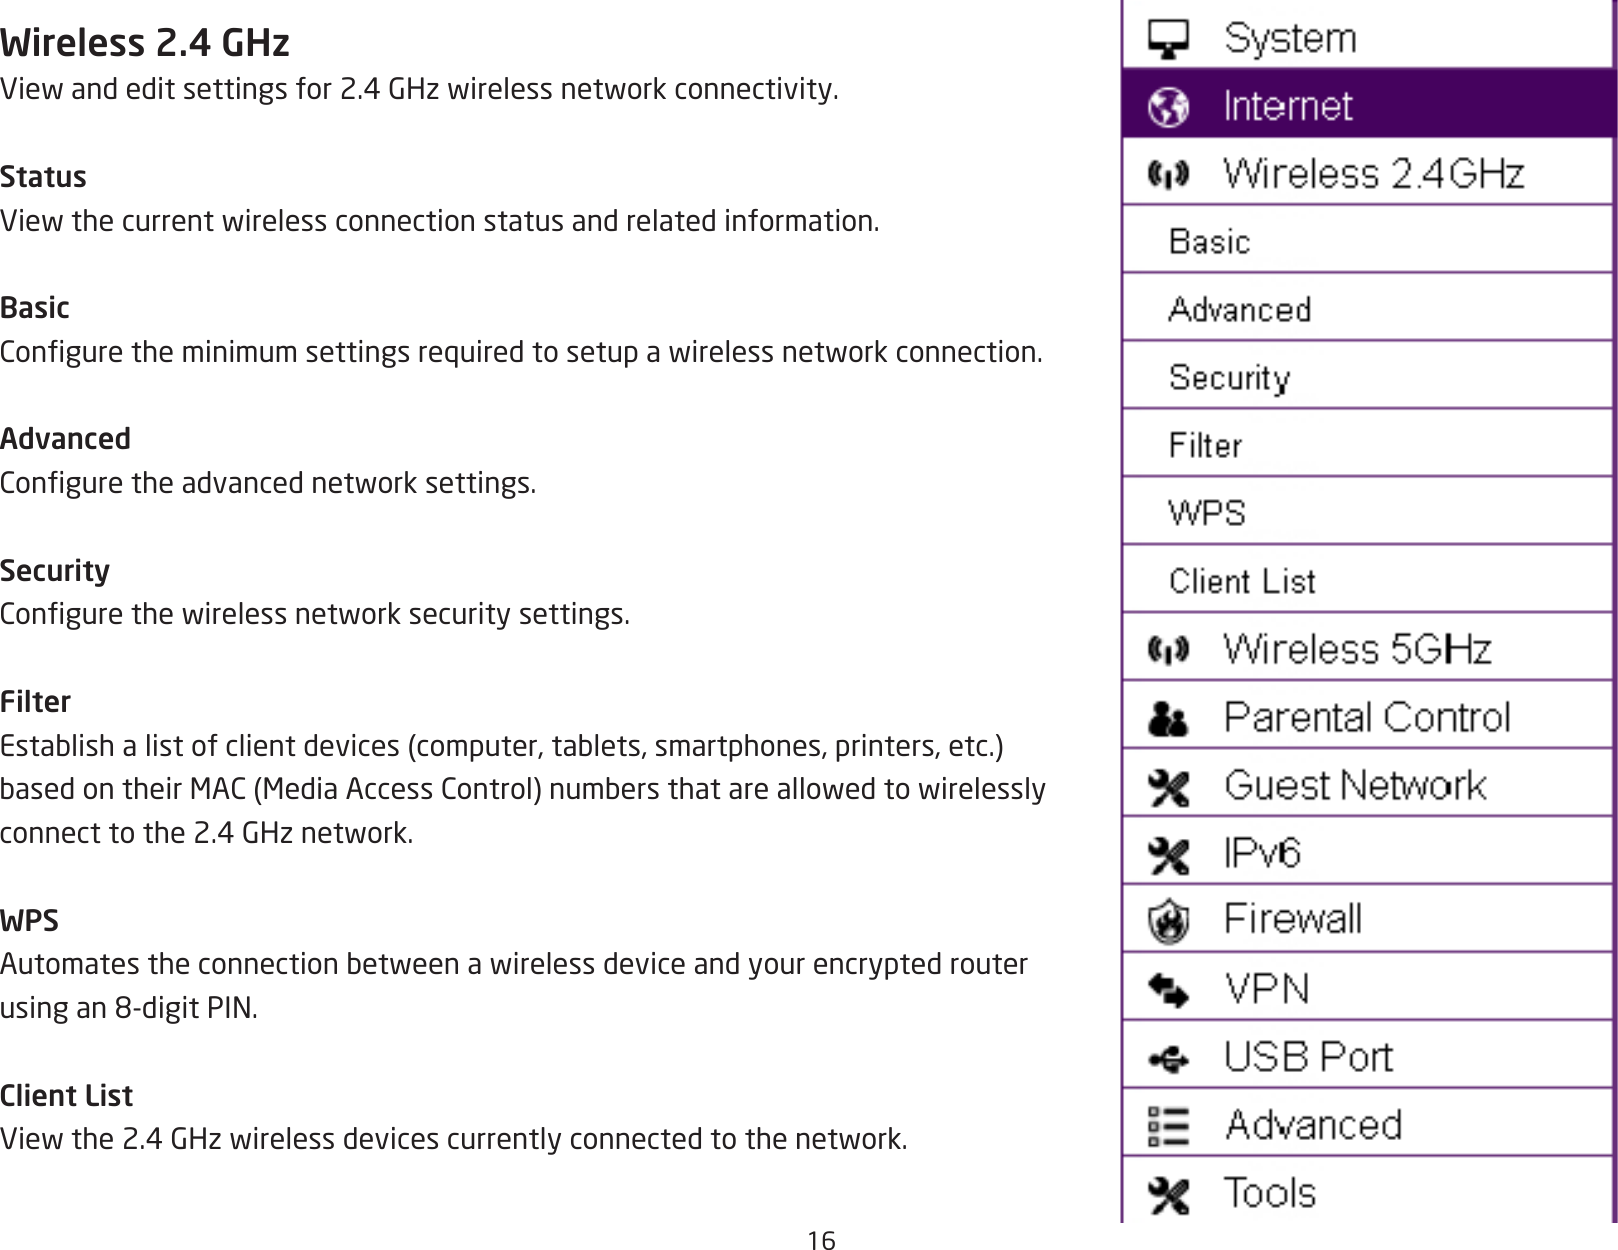 16Wireless 2.4 GHzViewandeditsettingsfor2.4GHzwirelessnetworkconnectivity.StatusViewthecurrentwirelessconnectionstatusandrelatedinformation.BasicConguretheminimumsettingsrequiredtosetupawirelessnetworkconnection.AdvancedConguretheadvancednetworksettings.SecurityCongurethewirelessnetworksecuritysettings.FilterEstablishalistofclientdevices(computer,tablets,smartphones,printers,etc.)basedontheirMAC(MediaAccessControl)numbersthatareallowedtowirelesslyconnecttothe2.4GHznetwork.WPSAutomatestheconnectionbetweenawirelessdeviceandyourencryptedrouterusingan8-digitPIN.Client ListViewthe2.4GHzwirelessdevicescurrentlyconnectedtothenetwork.